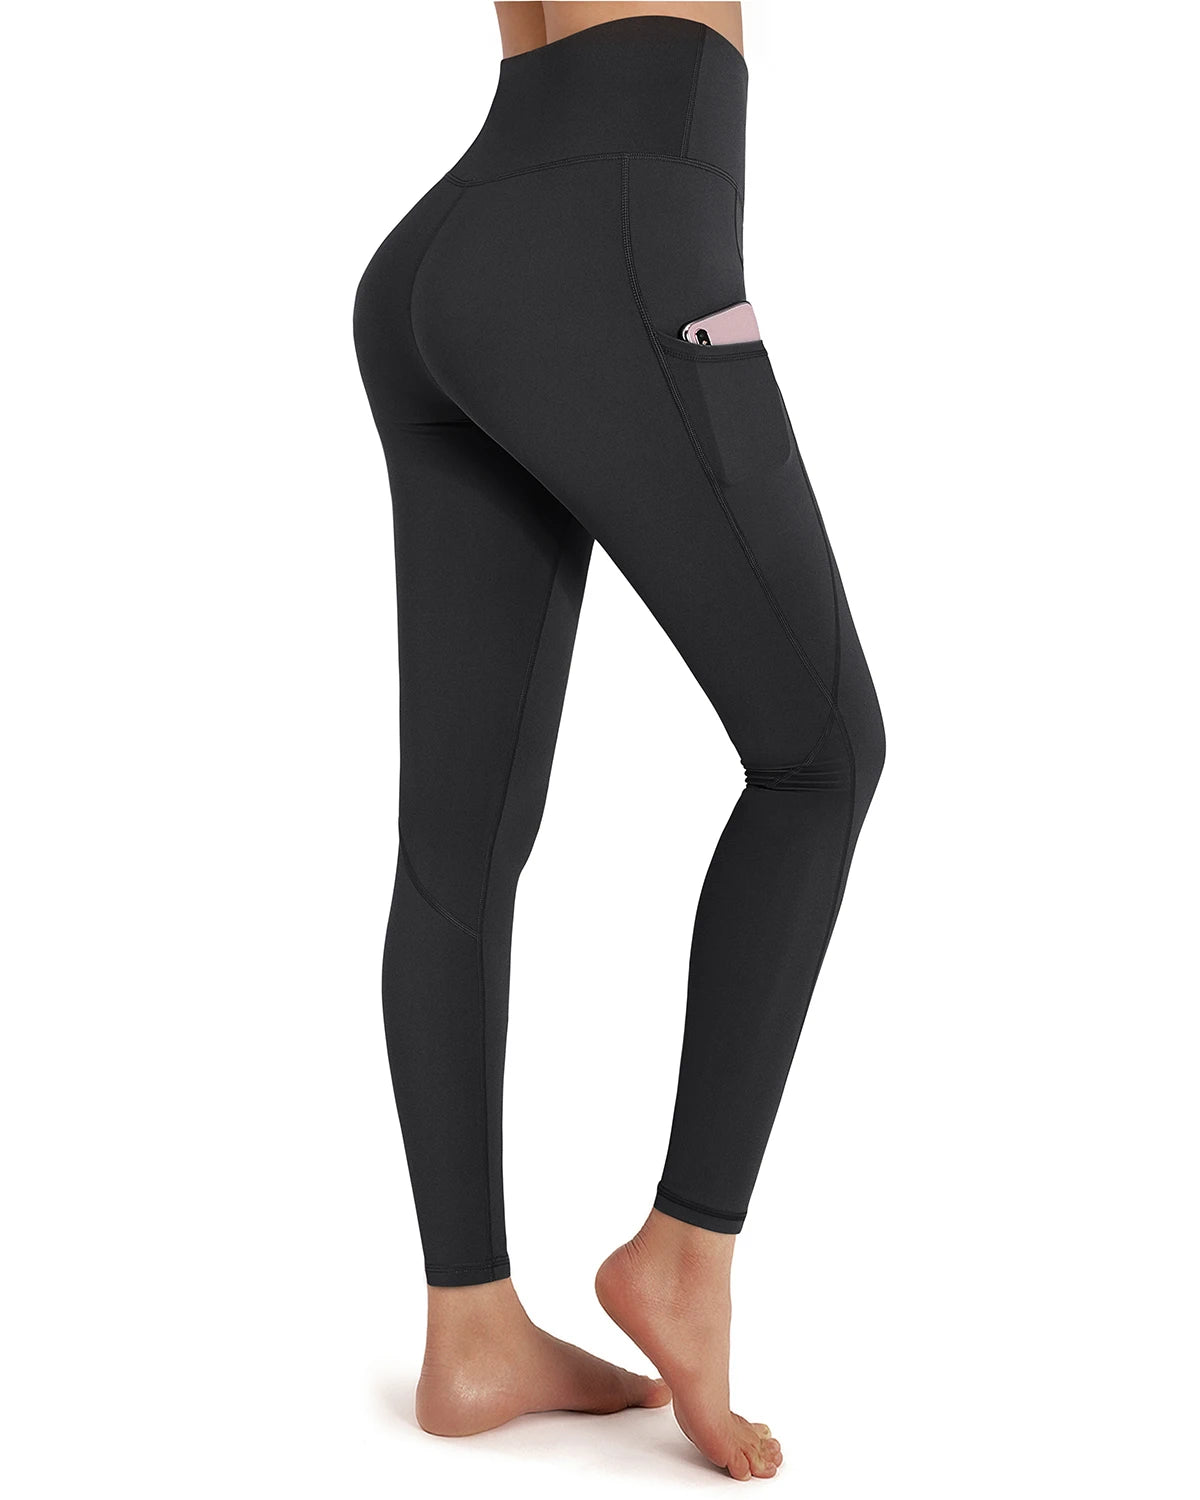 Women's OUGES High Waist Yoga Pants with Pockets Workout Running Leggings